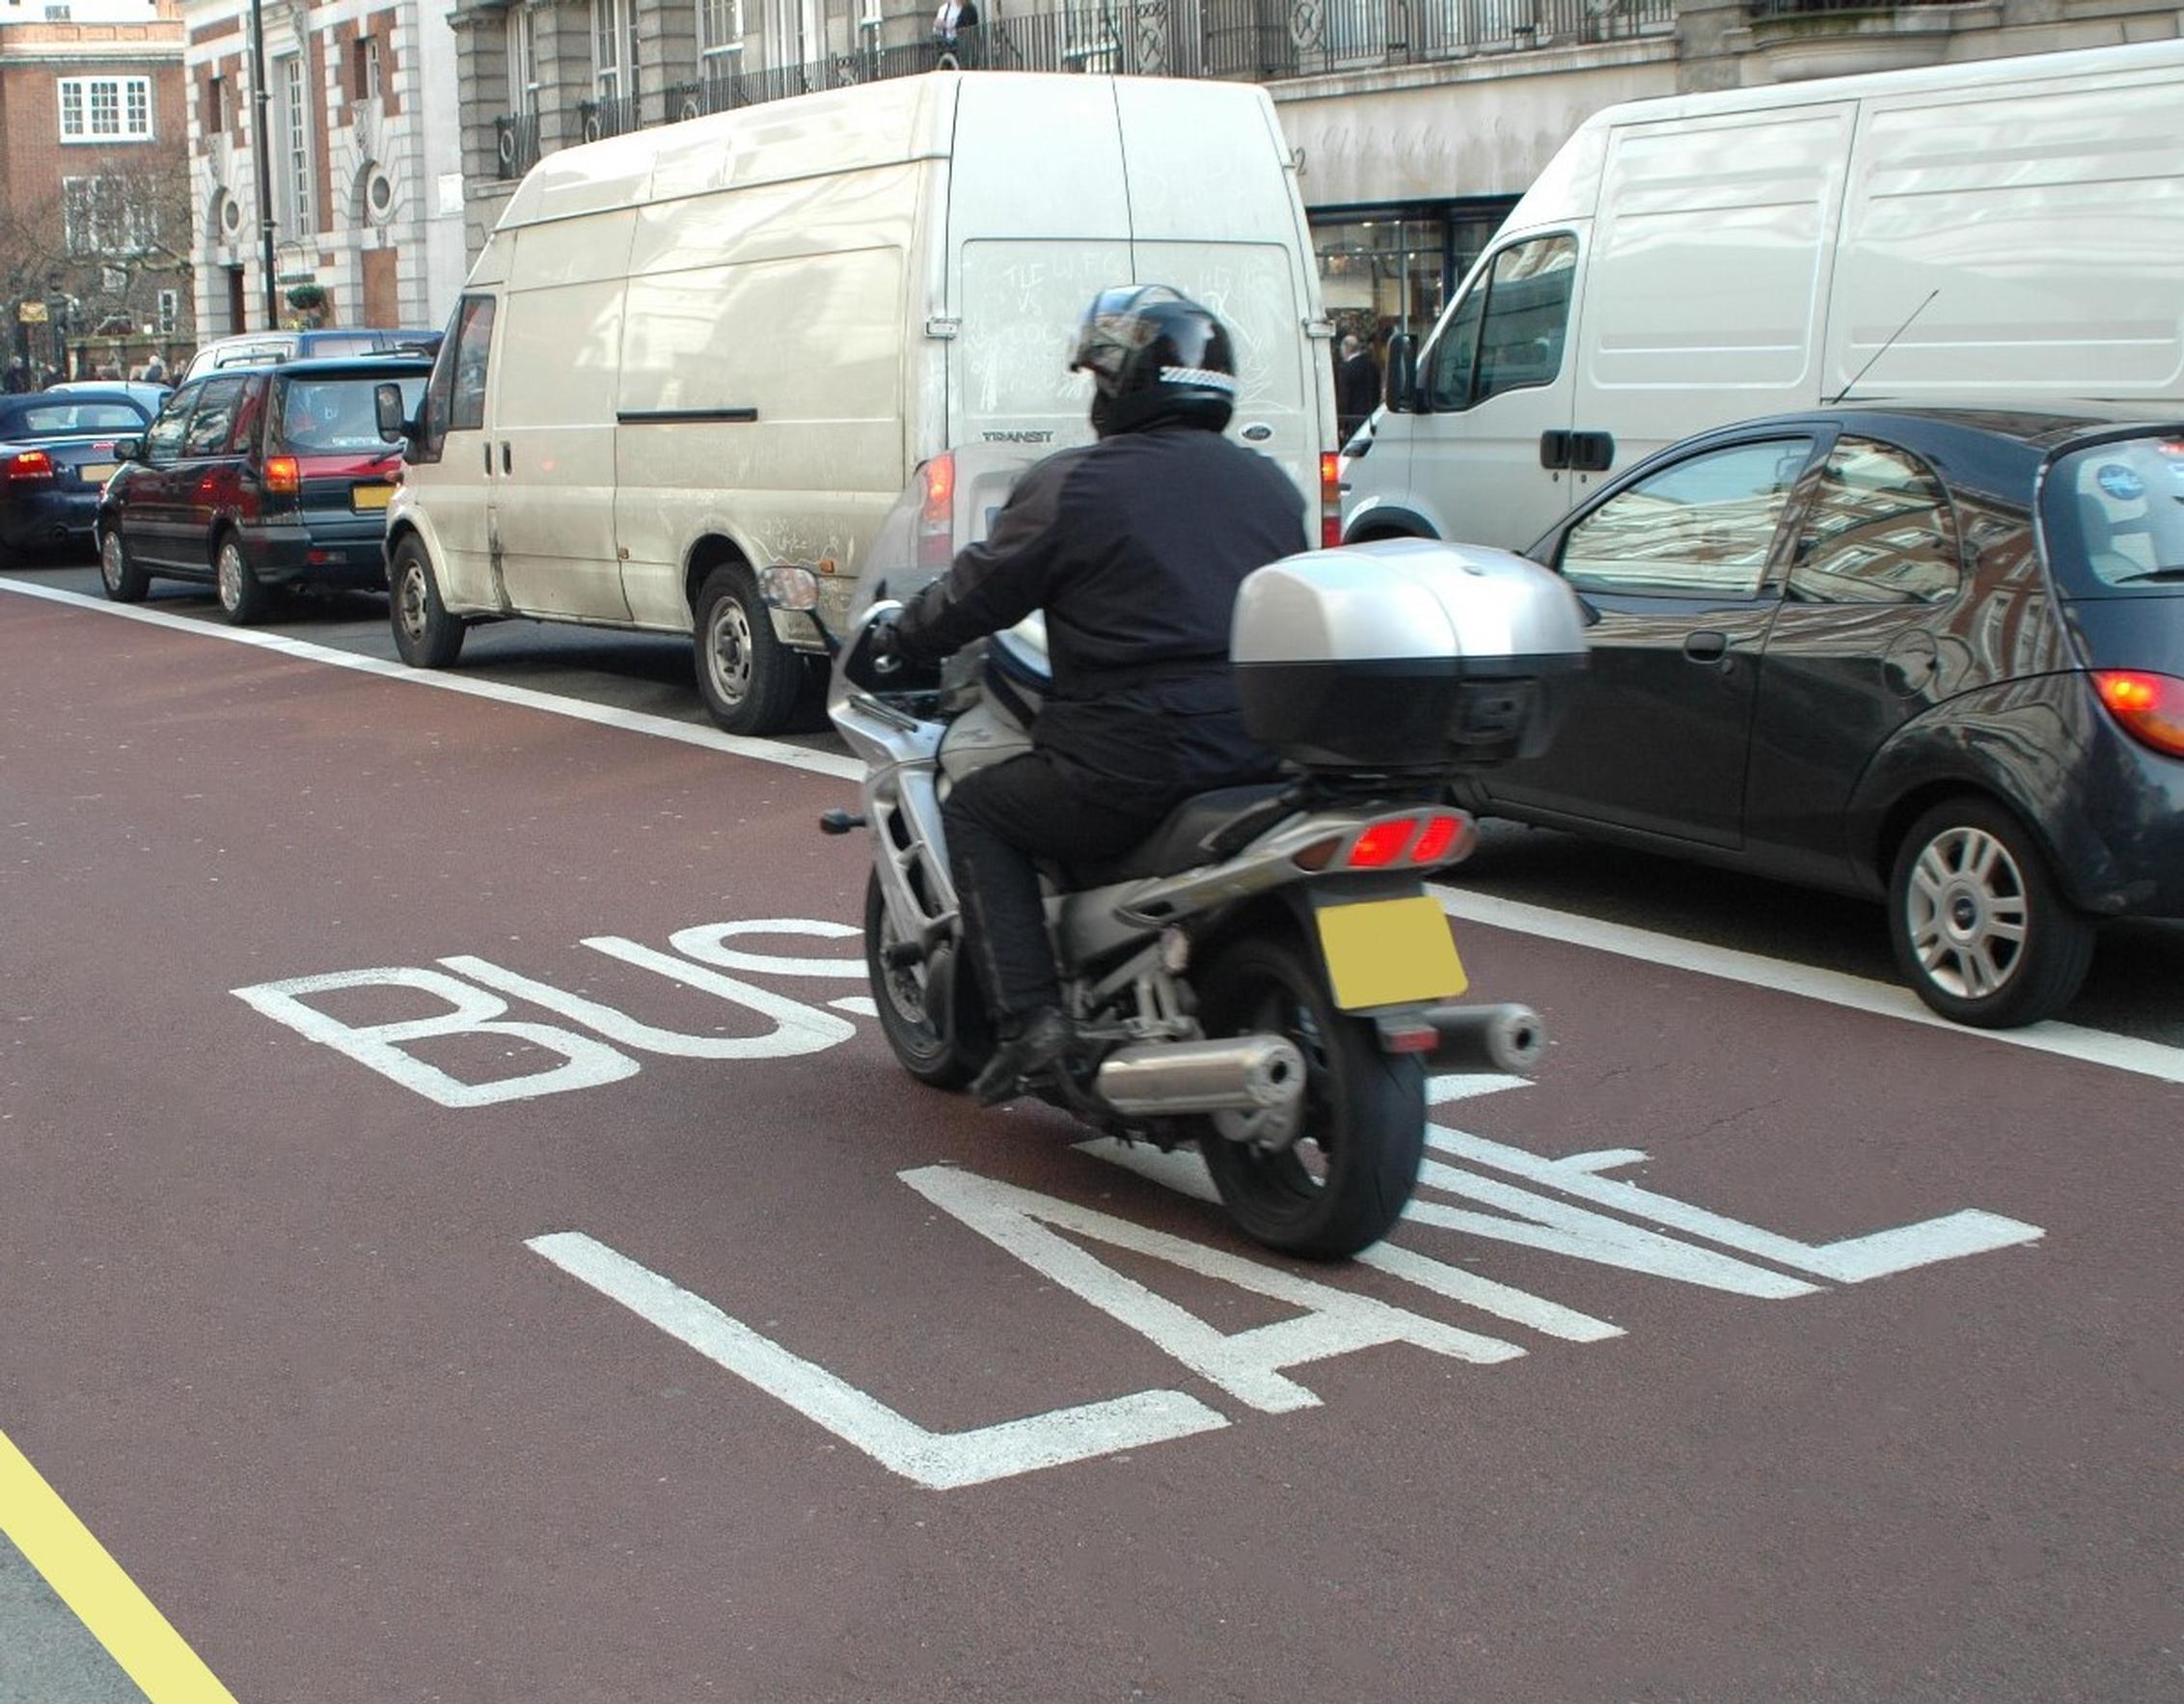 DfT publishes guidance on letting motorbikes use bus lanes